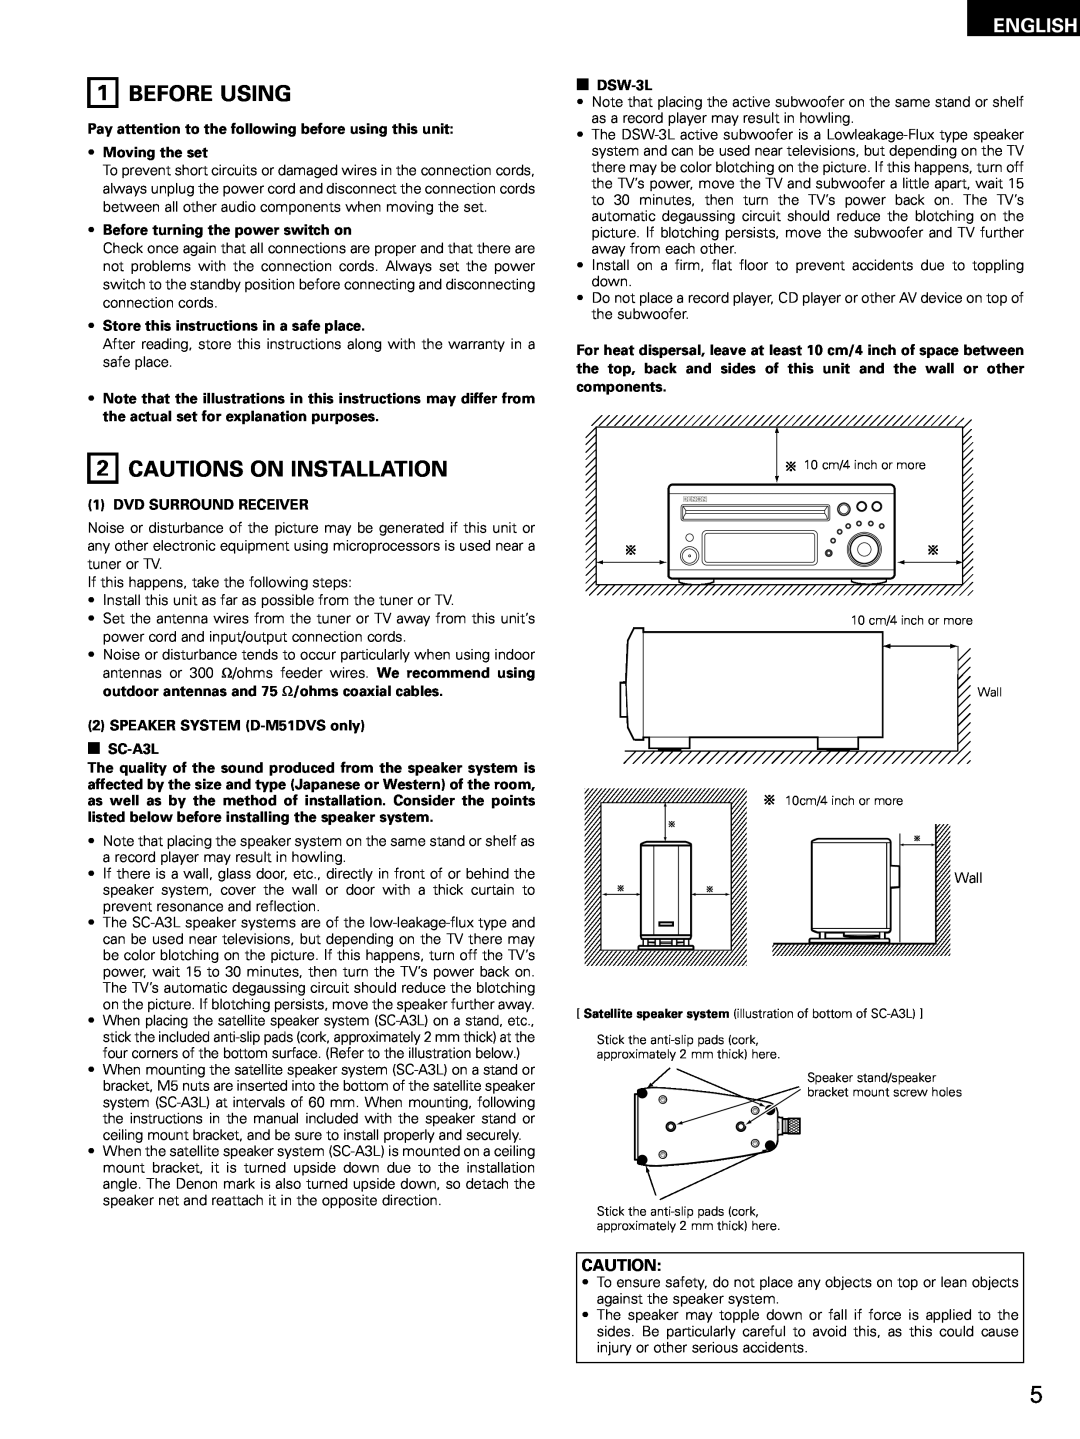 Denon ADV-M51 manual Before Using, 2CAUTIONS ON INSTALLATION, English, Moving the set, •Before turning the power switch on 